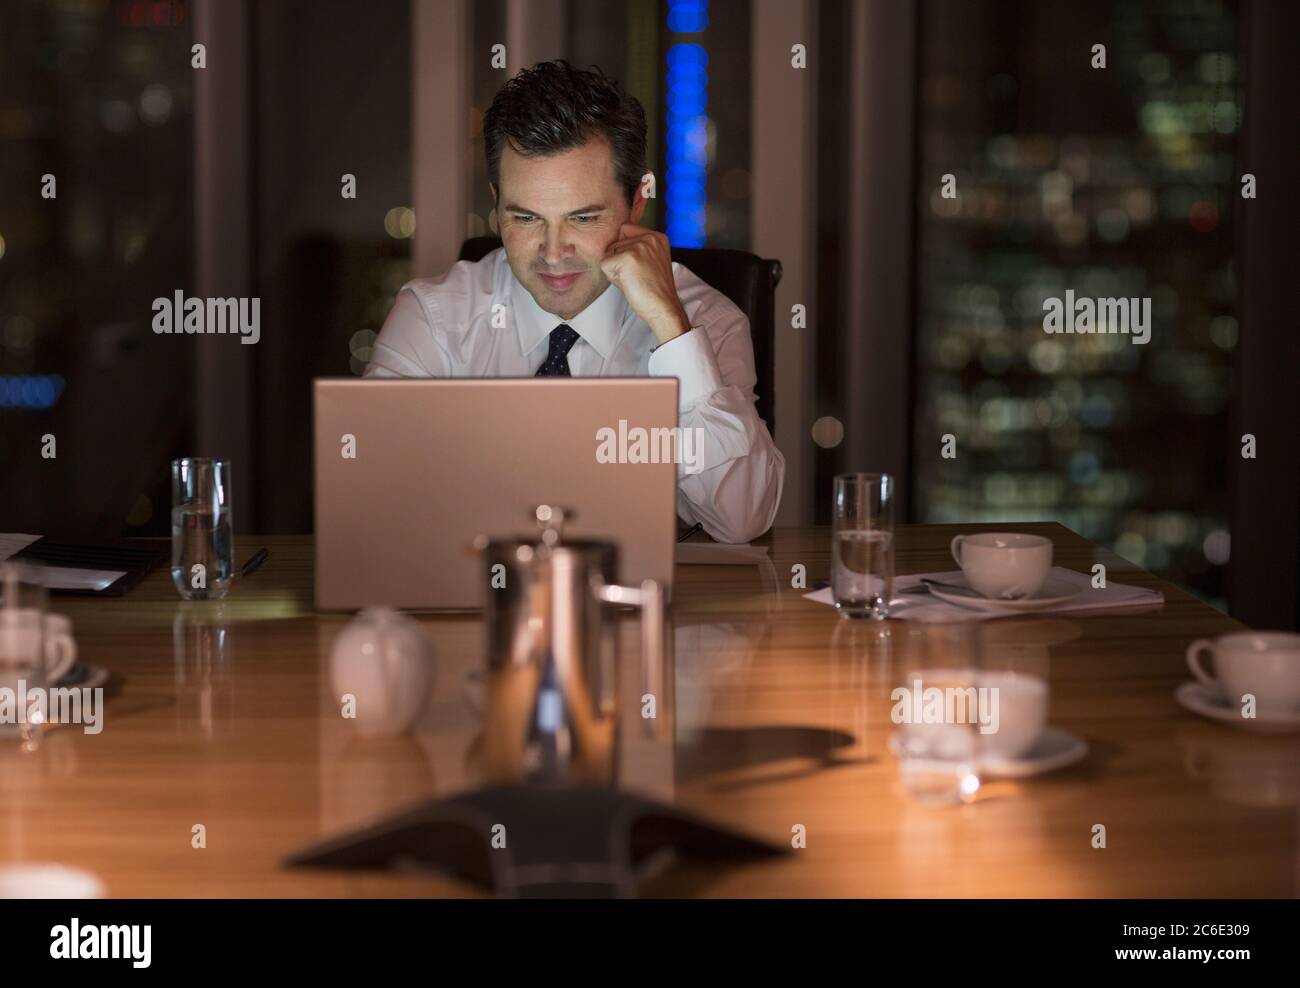 Businessman working late at laptop in conference room at night Stock Photo